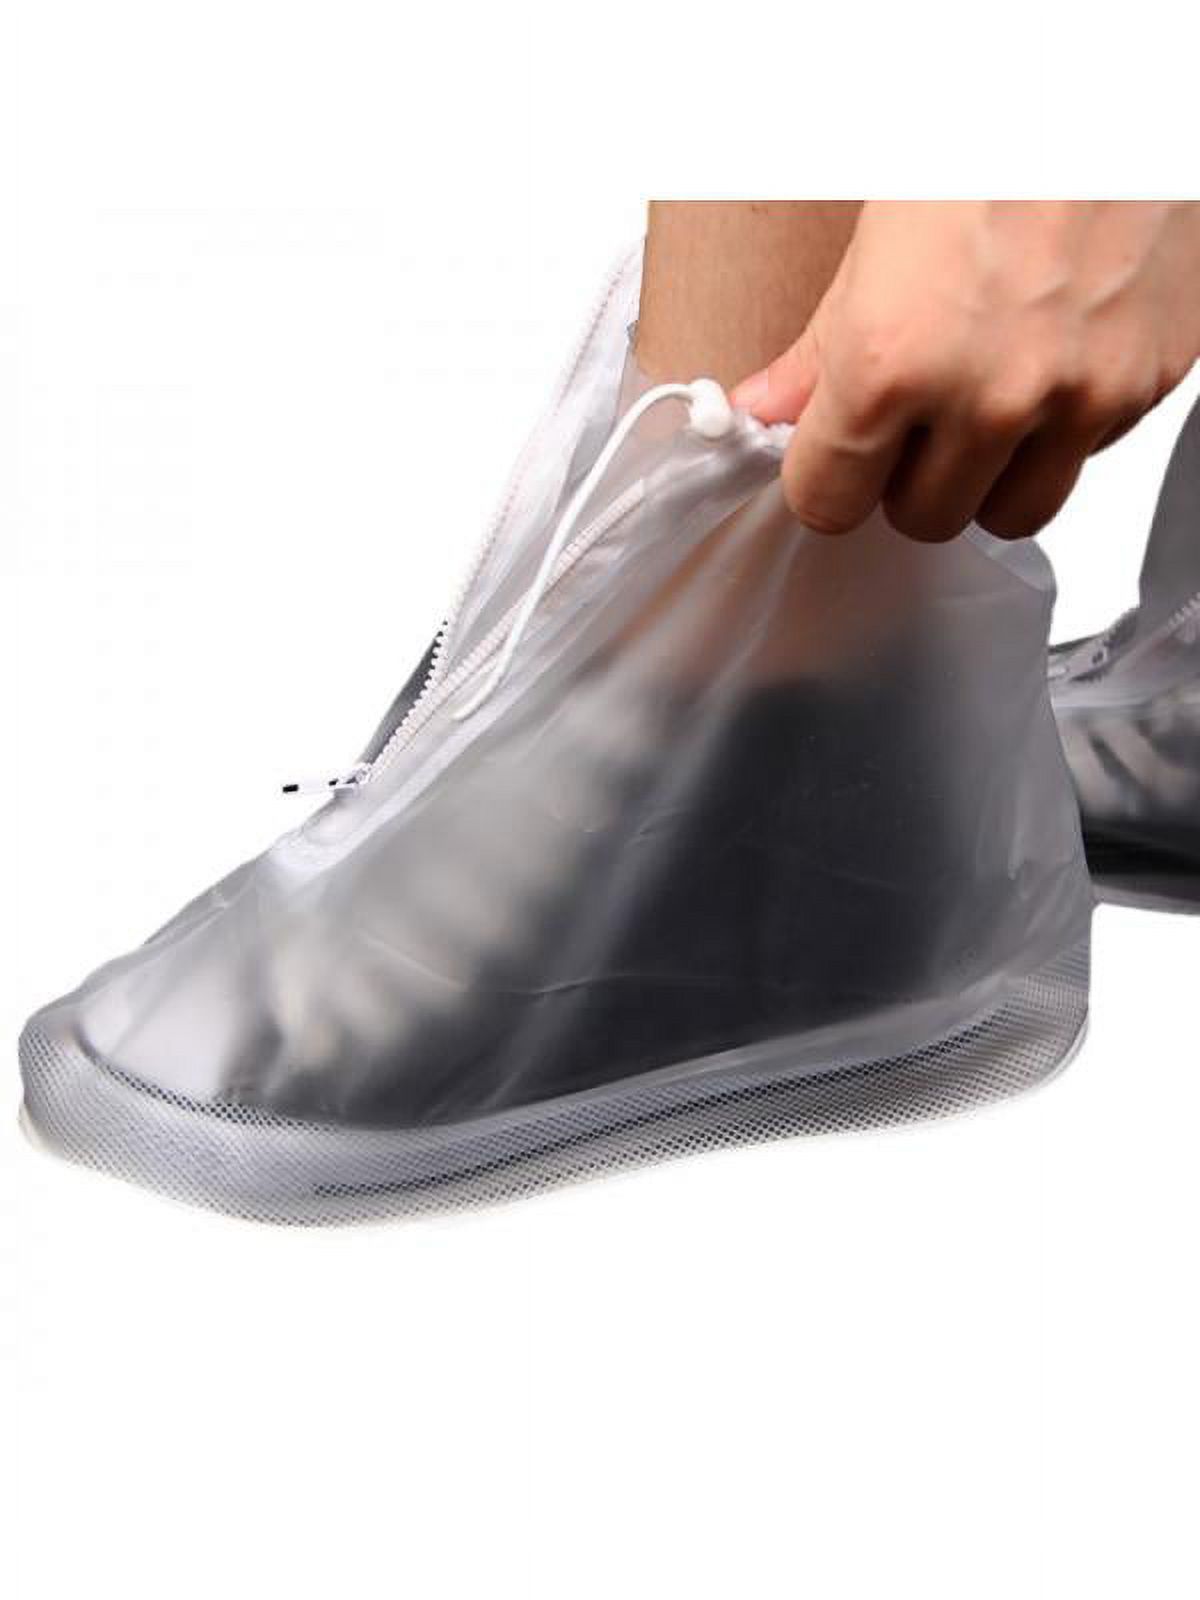 Rain Snow Shoe Covers Reusable Waterproof shoes Overshoes Boot Protector - image 3 of 6